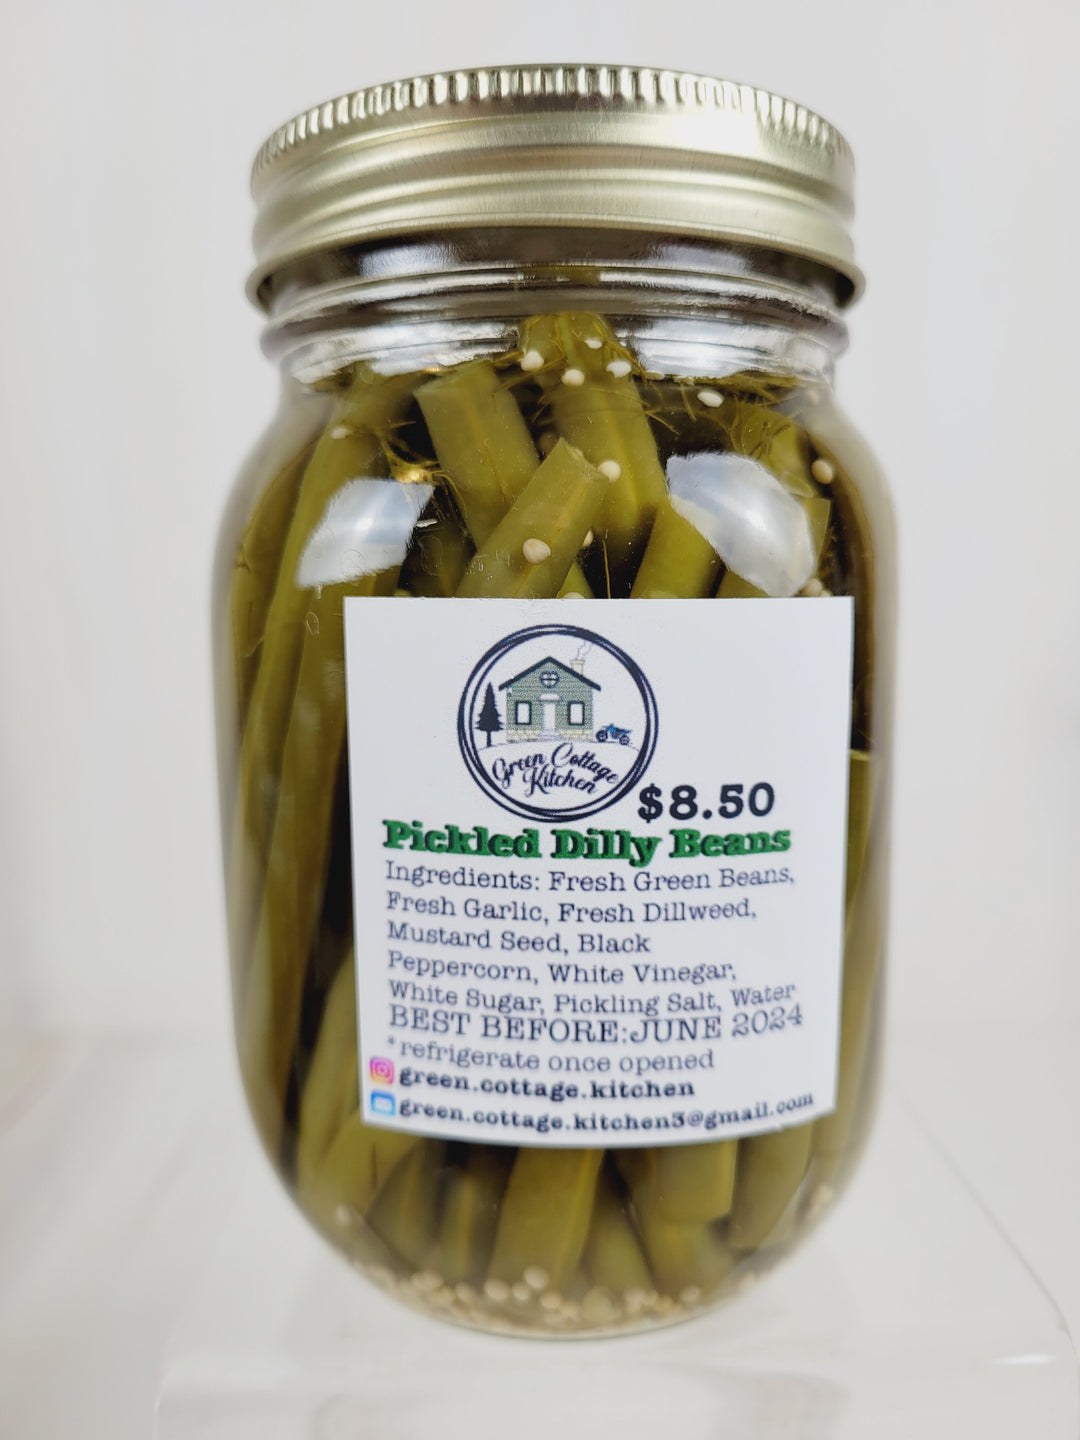 Green Cottage Kitchen, Dilly Beans (Regular, Spicy or Extra Garlic)